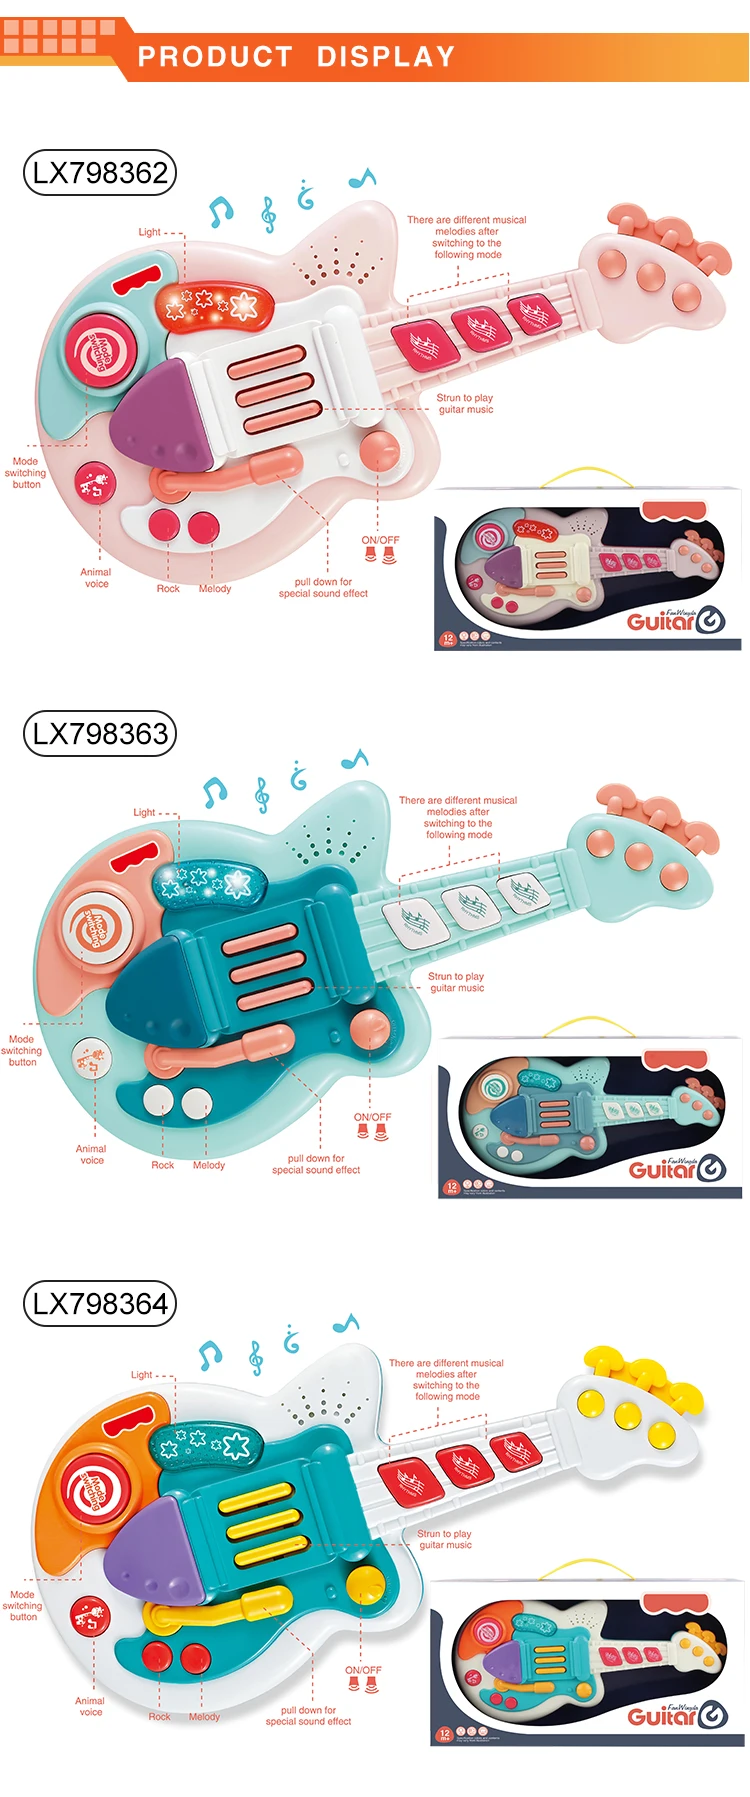 New Arrival Wlectric Multi-function Colorful Baby Toy Guitar With Music And Light For Kids